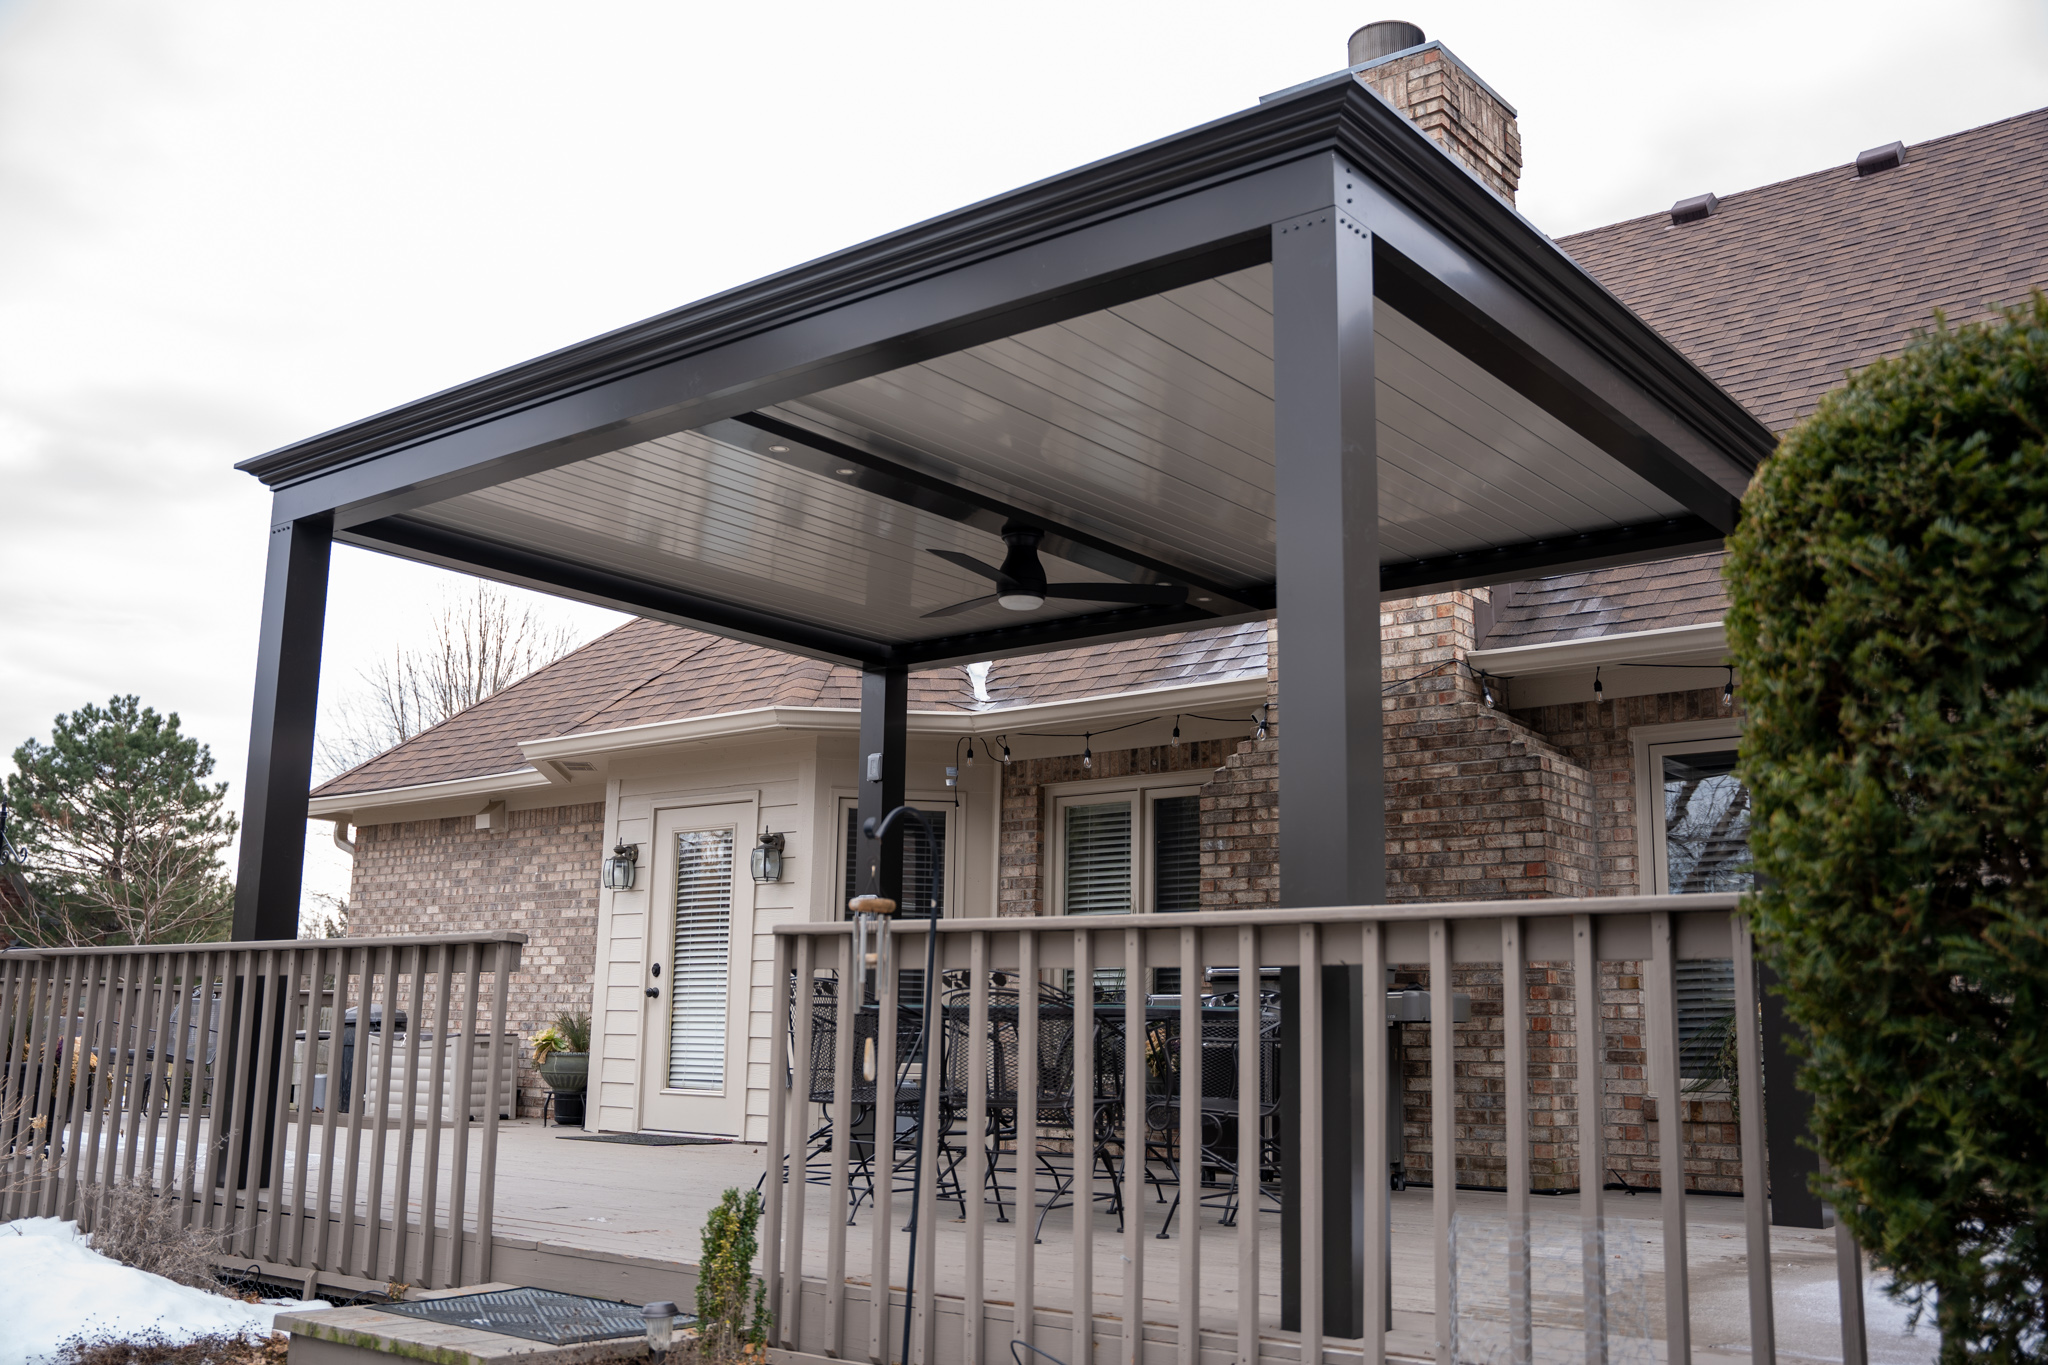 A bronze, powder coated louvered roof system can keep you safe in inclement weather.